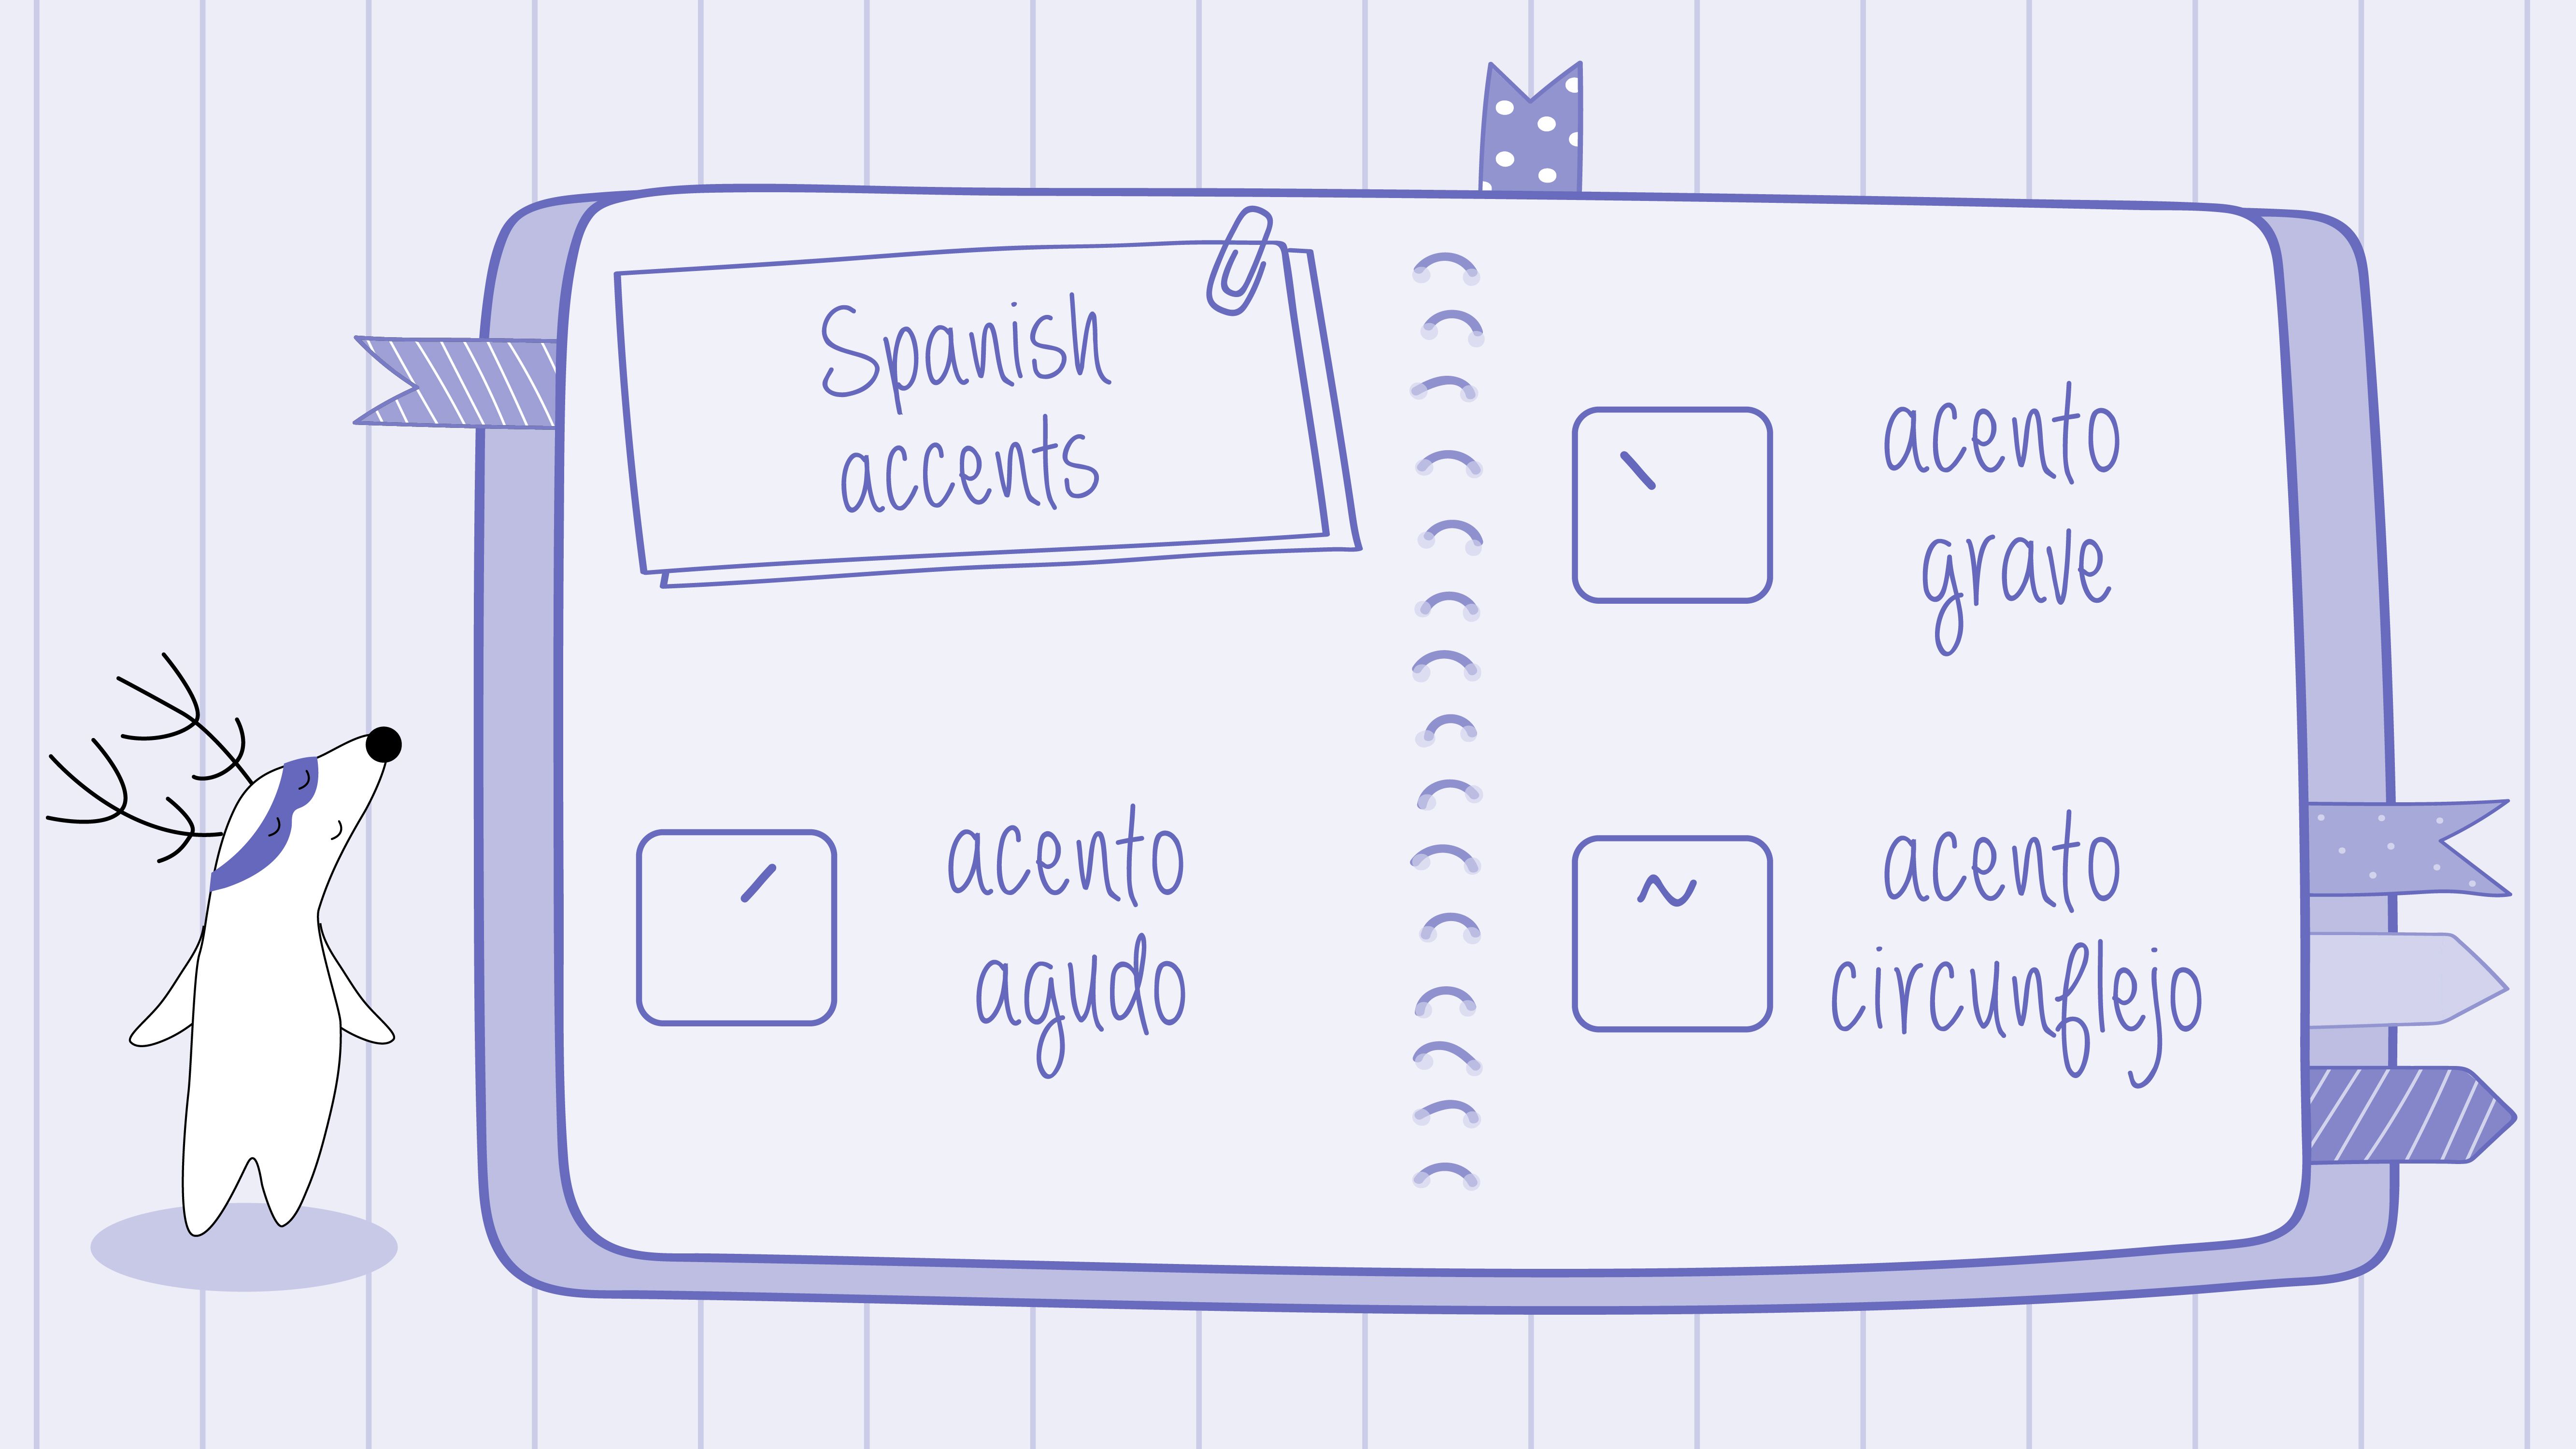 A picture of Soren’s notebook with Spanish accent marks page: acento agudo, acento grave, and acento cicunflejo.